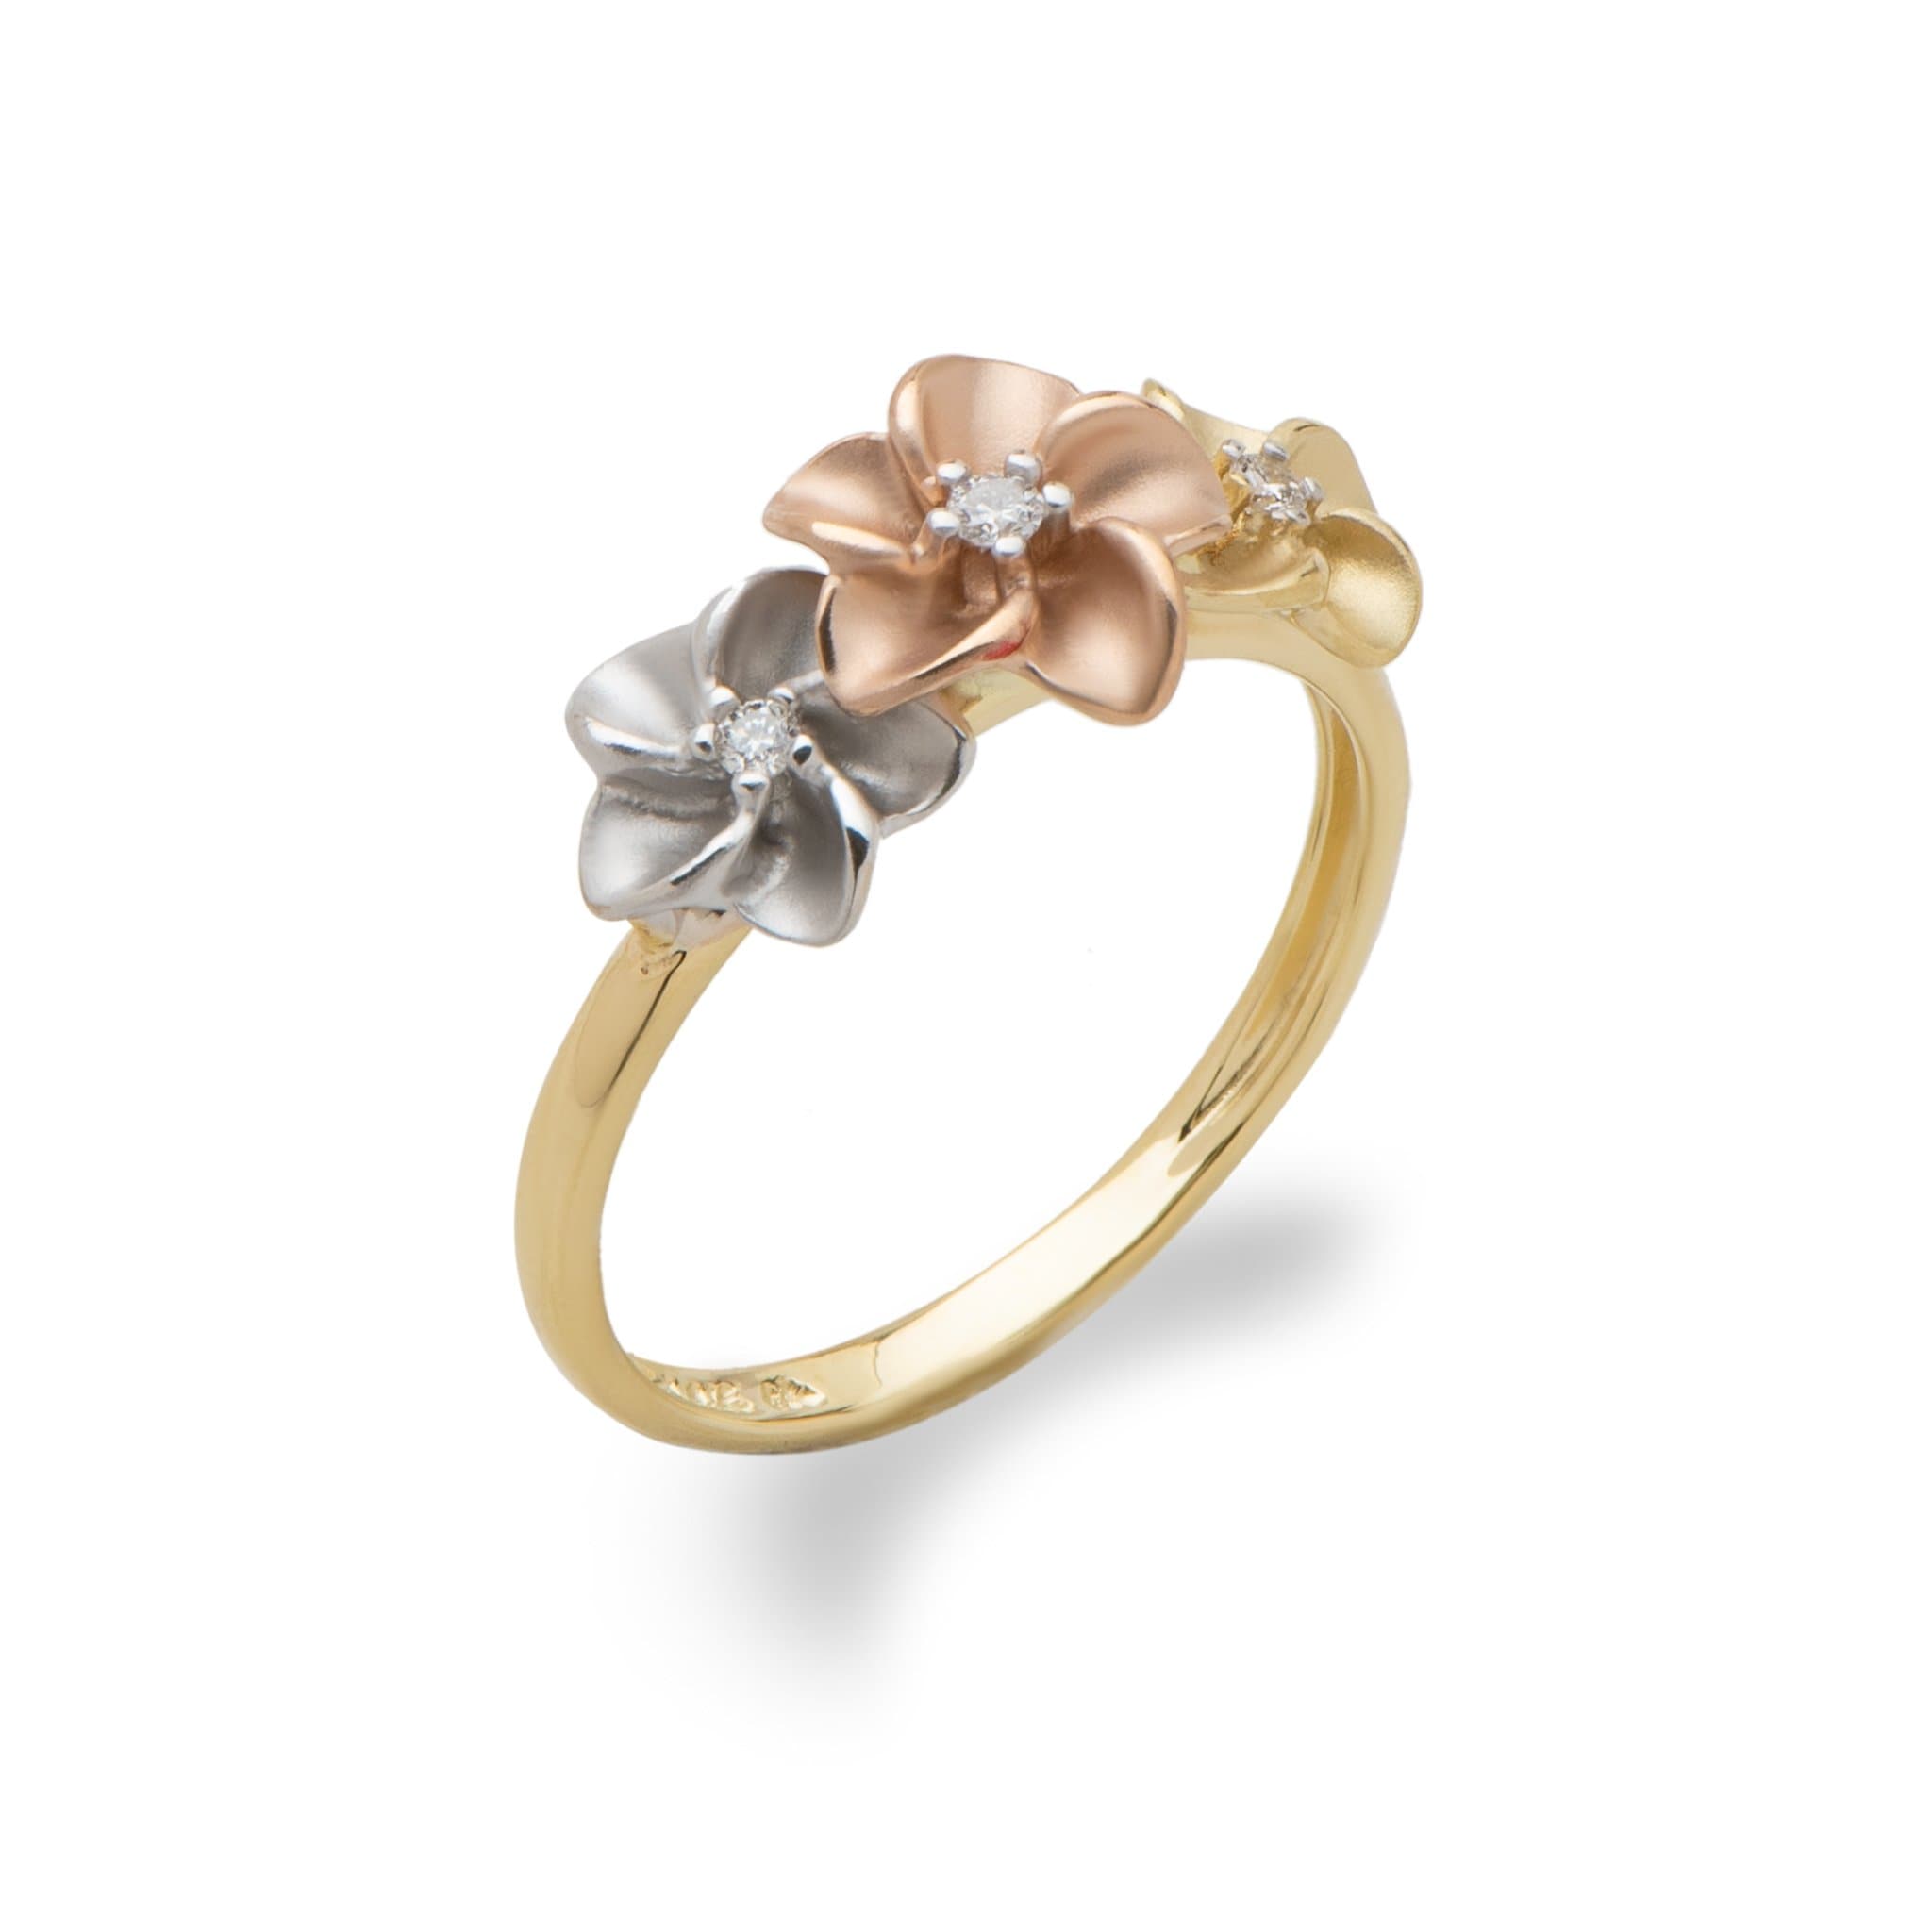 Plumeria Ring White, Rose, Yellow Gold with Diamonds – Maui Divers Jewelry